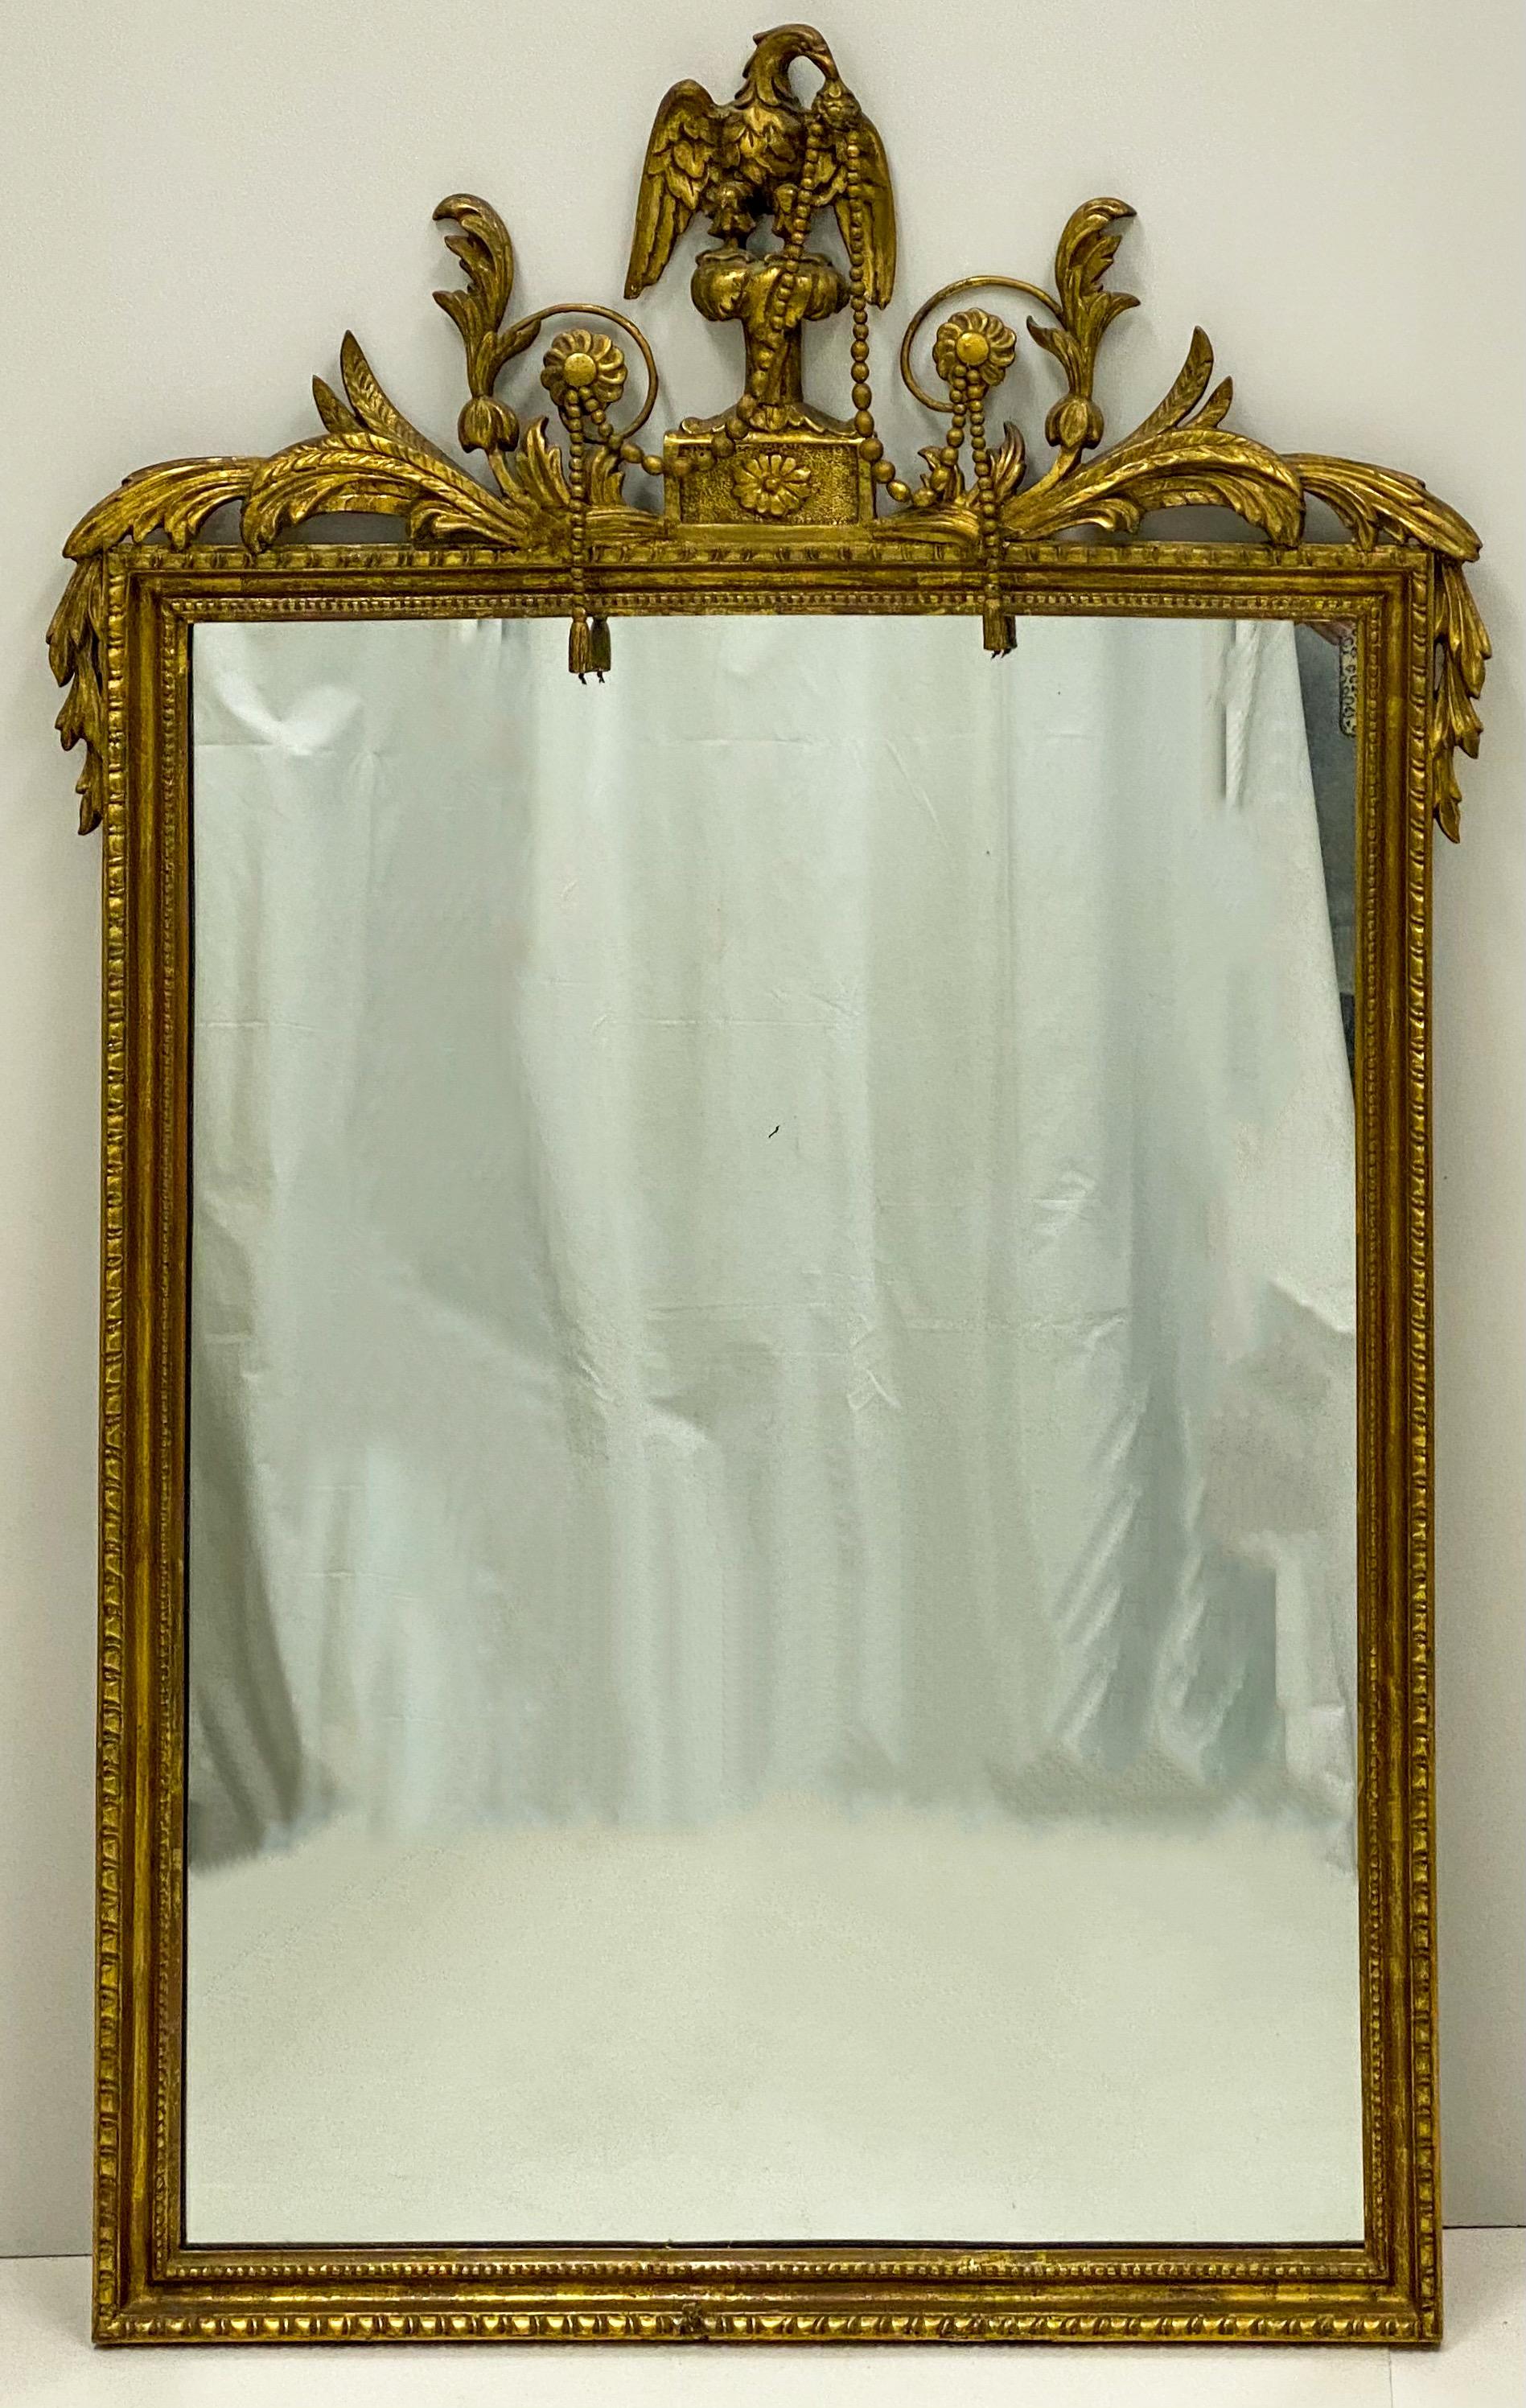 20th Century 1940s Italian Giltwood Federal Style Mirror with Carved Eagle